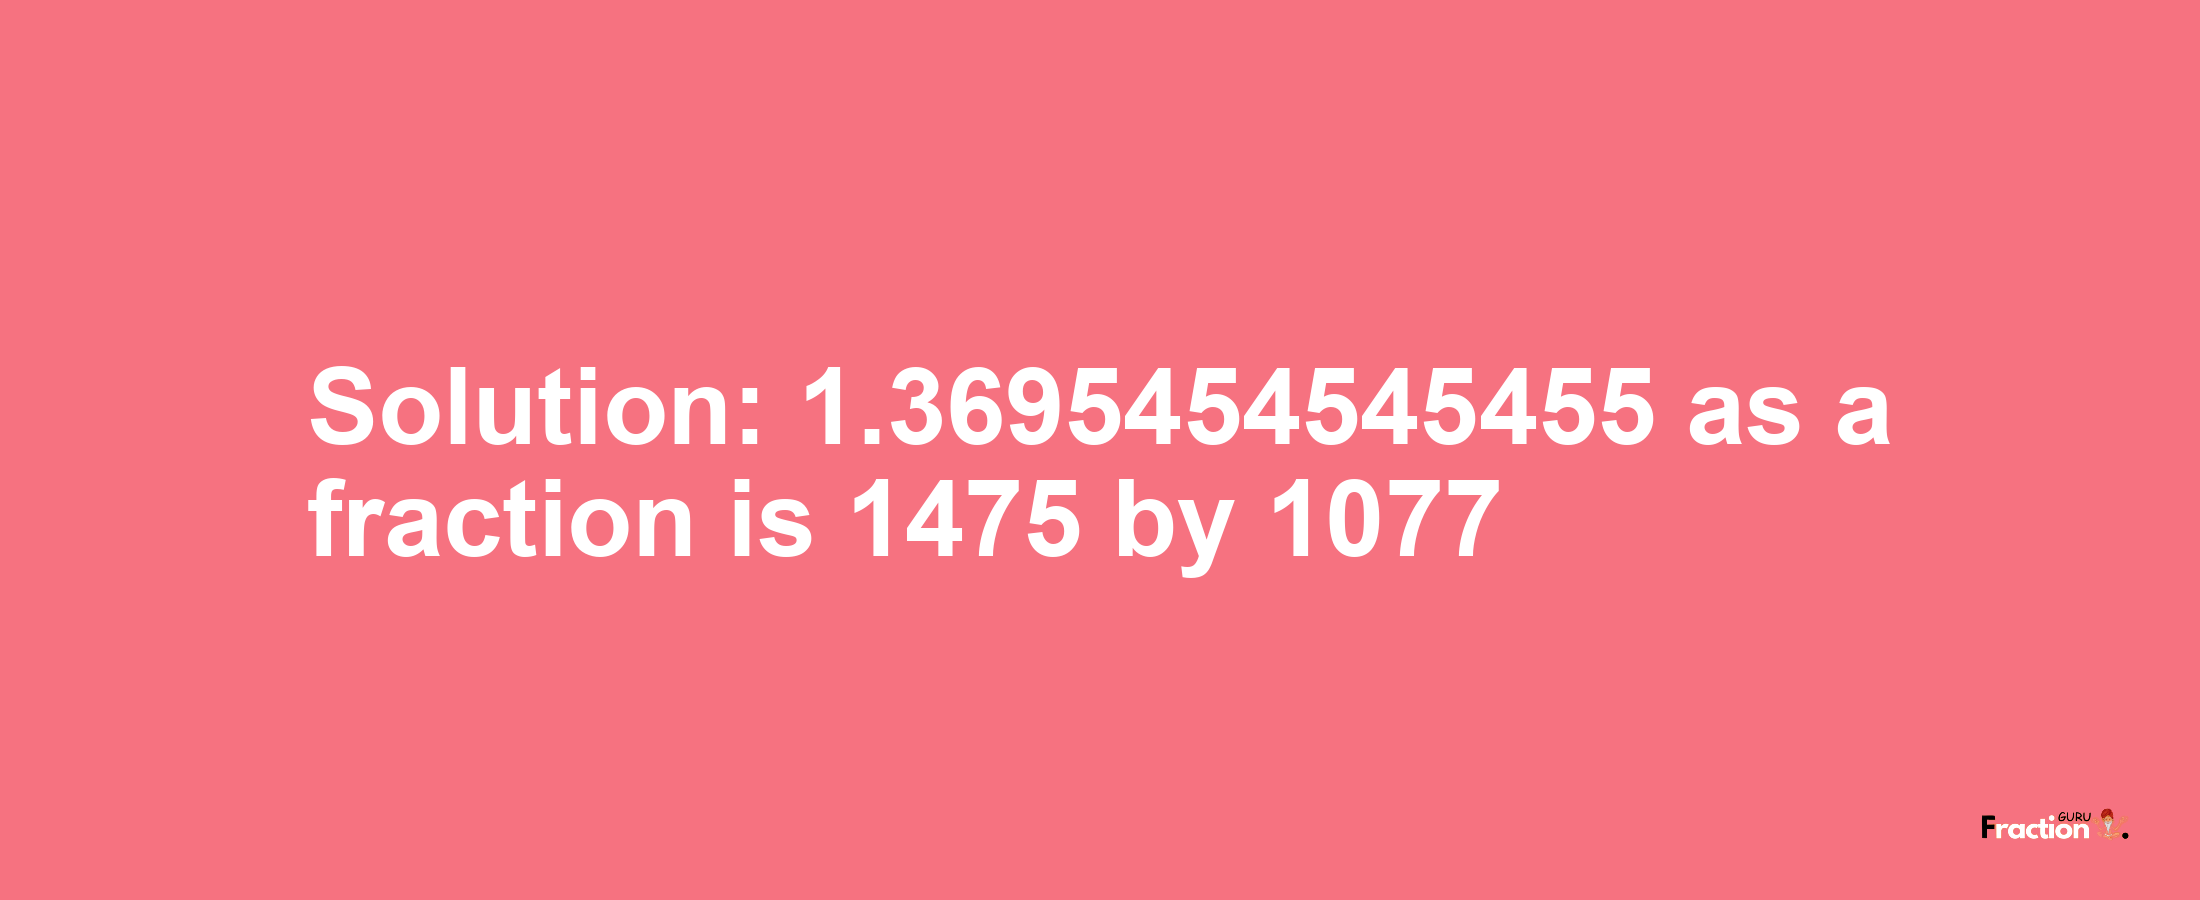 Solution:1.3695454545455 as a fraction is 1475/1077